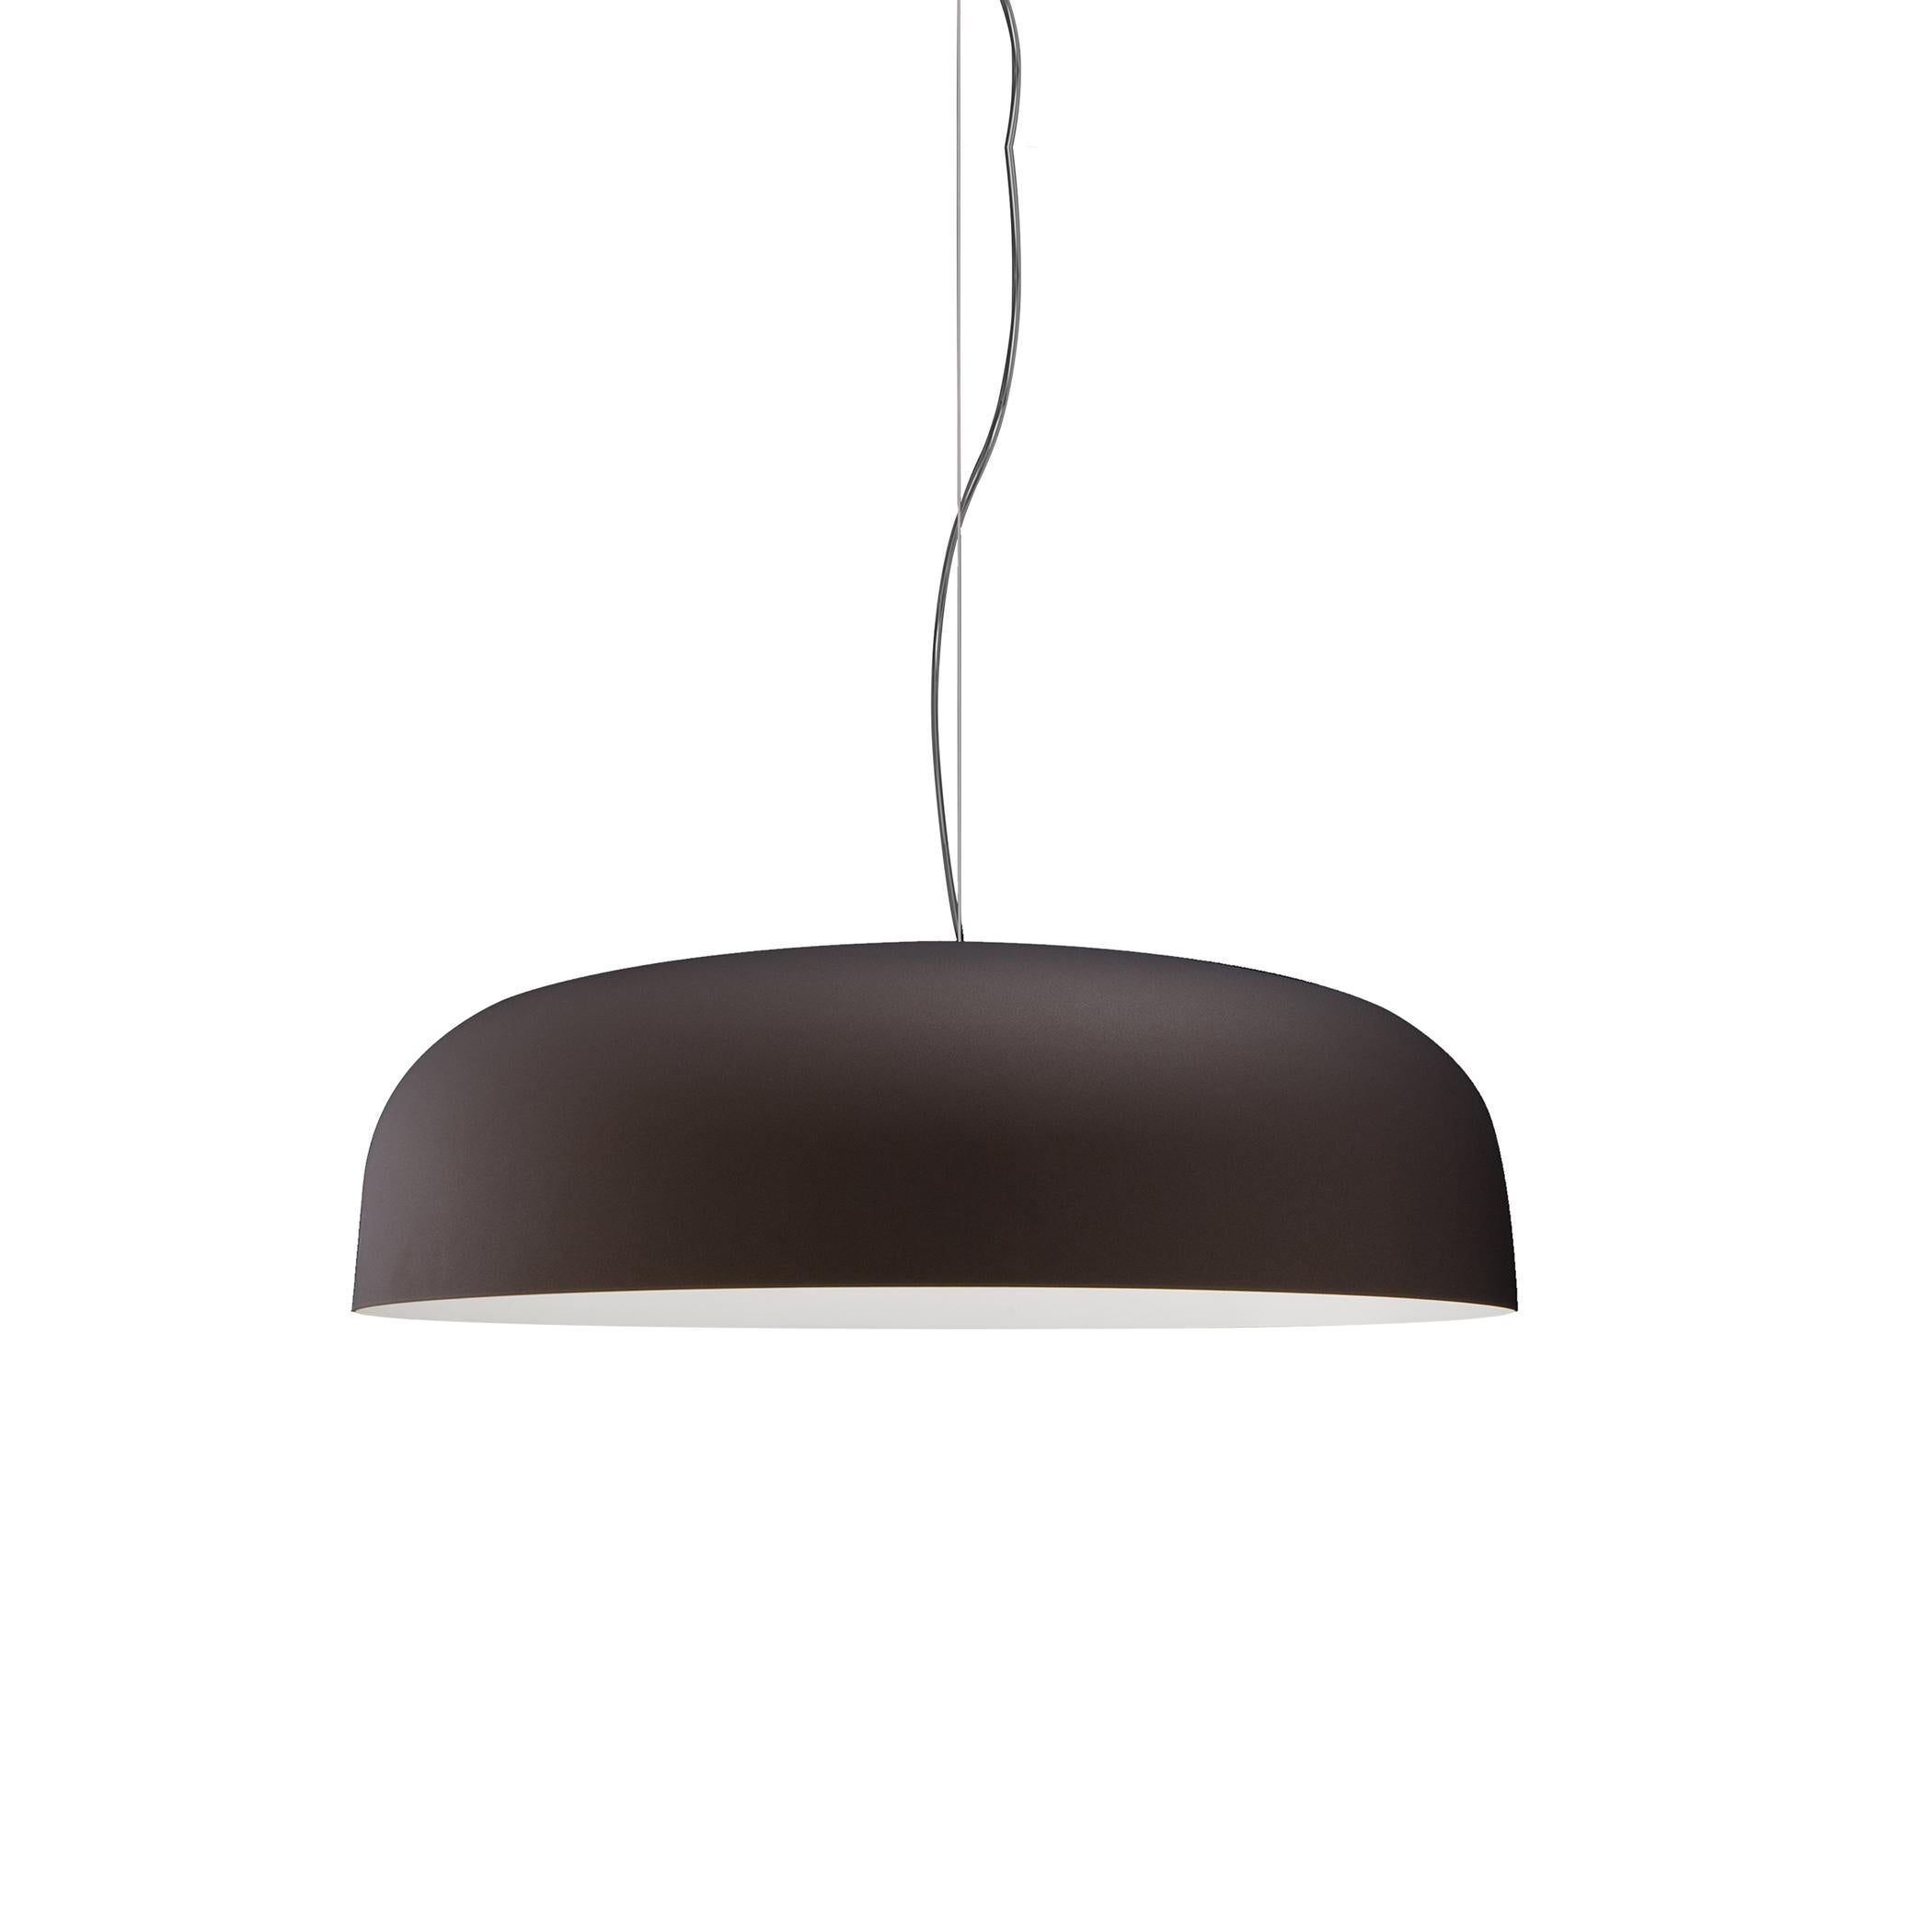 Mid-Century Modern Francesco Rota Suspension Lamp 'Canopy' 421 Bronze and White by Oluce